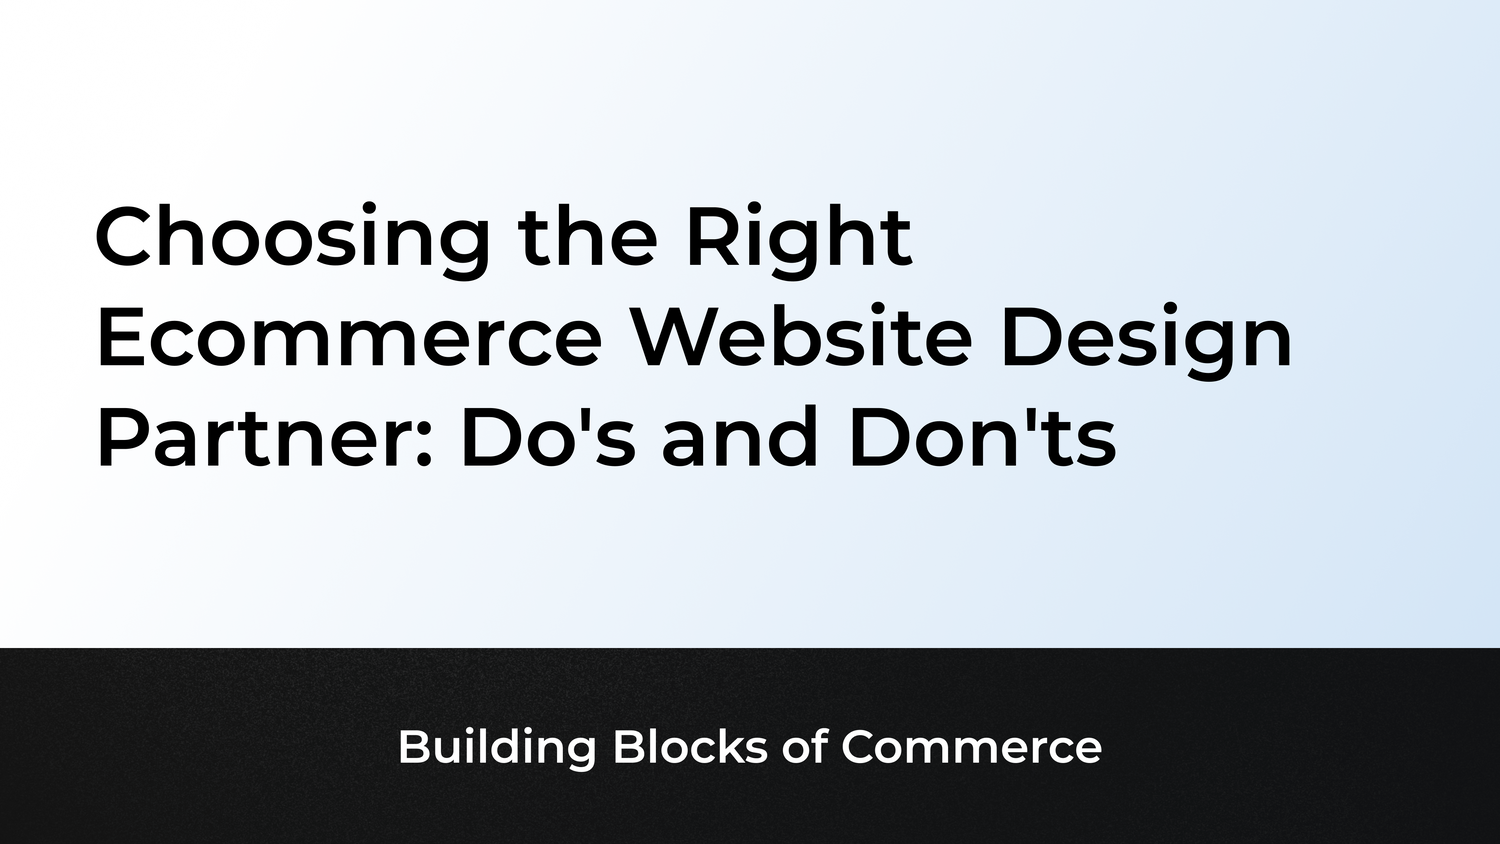 Choosing the Right Ecommerce Website Design Partner: Do's and Don'ts